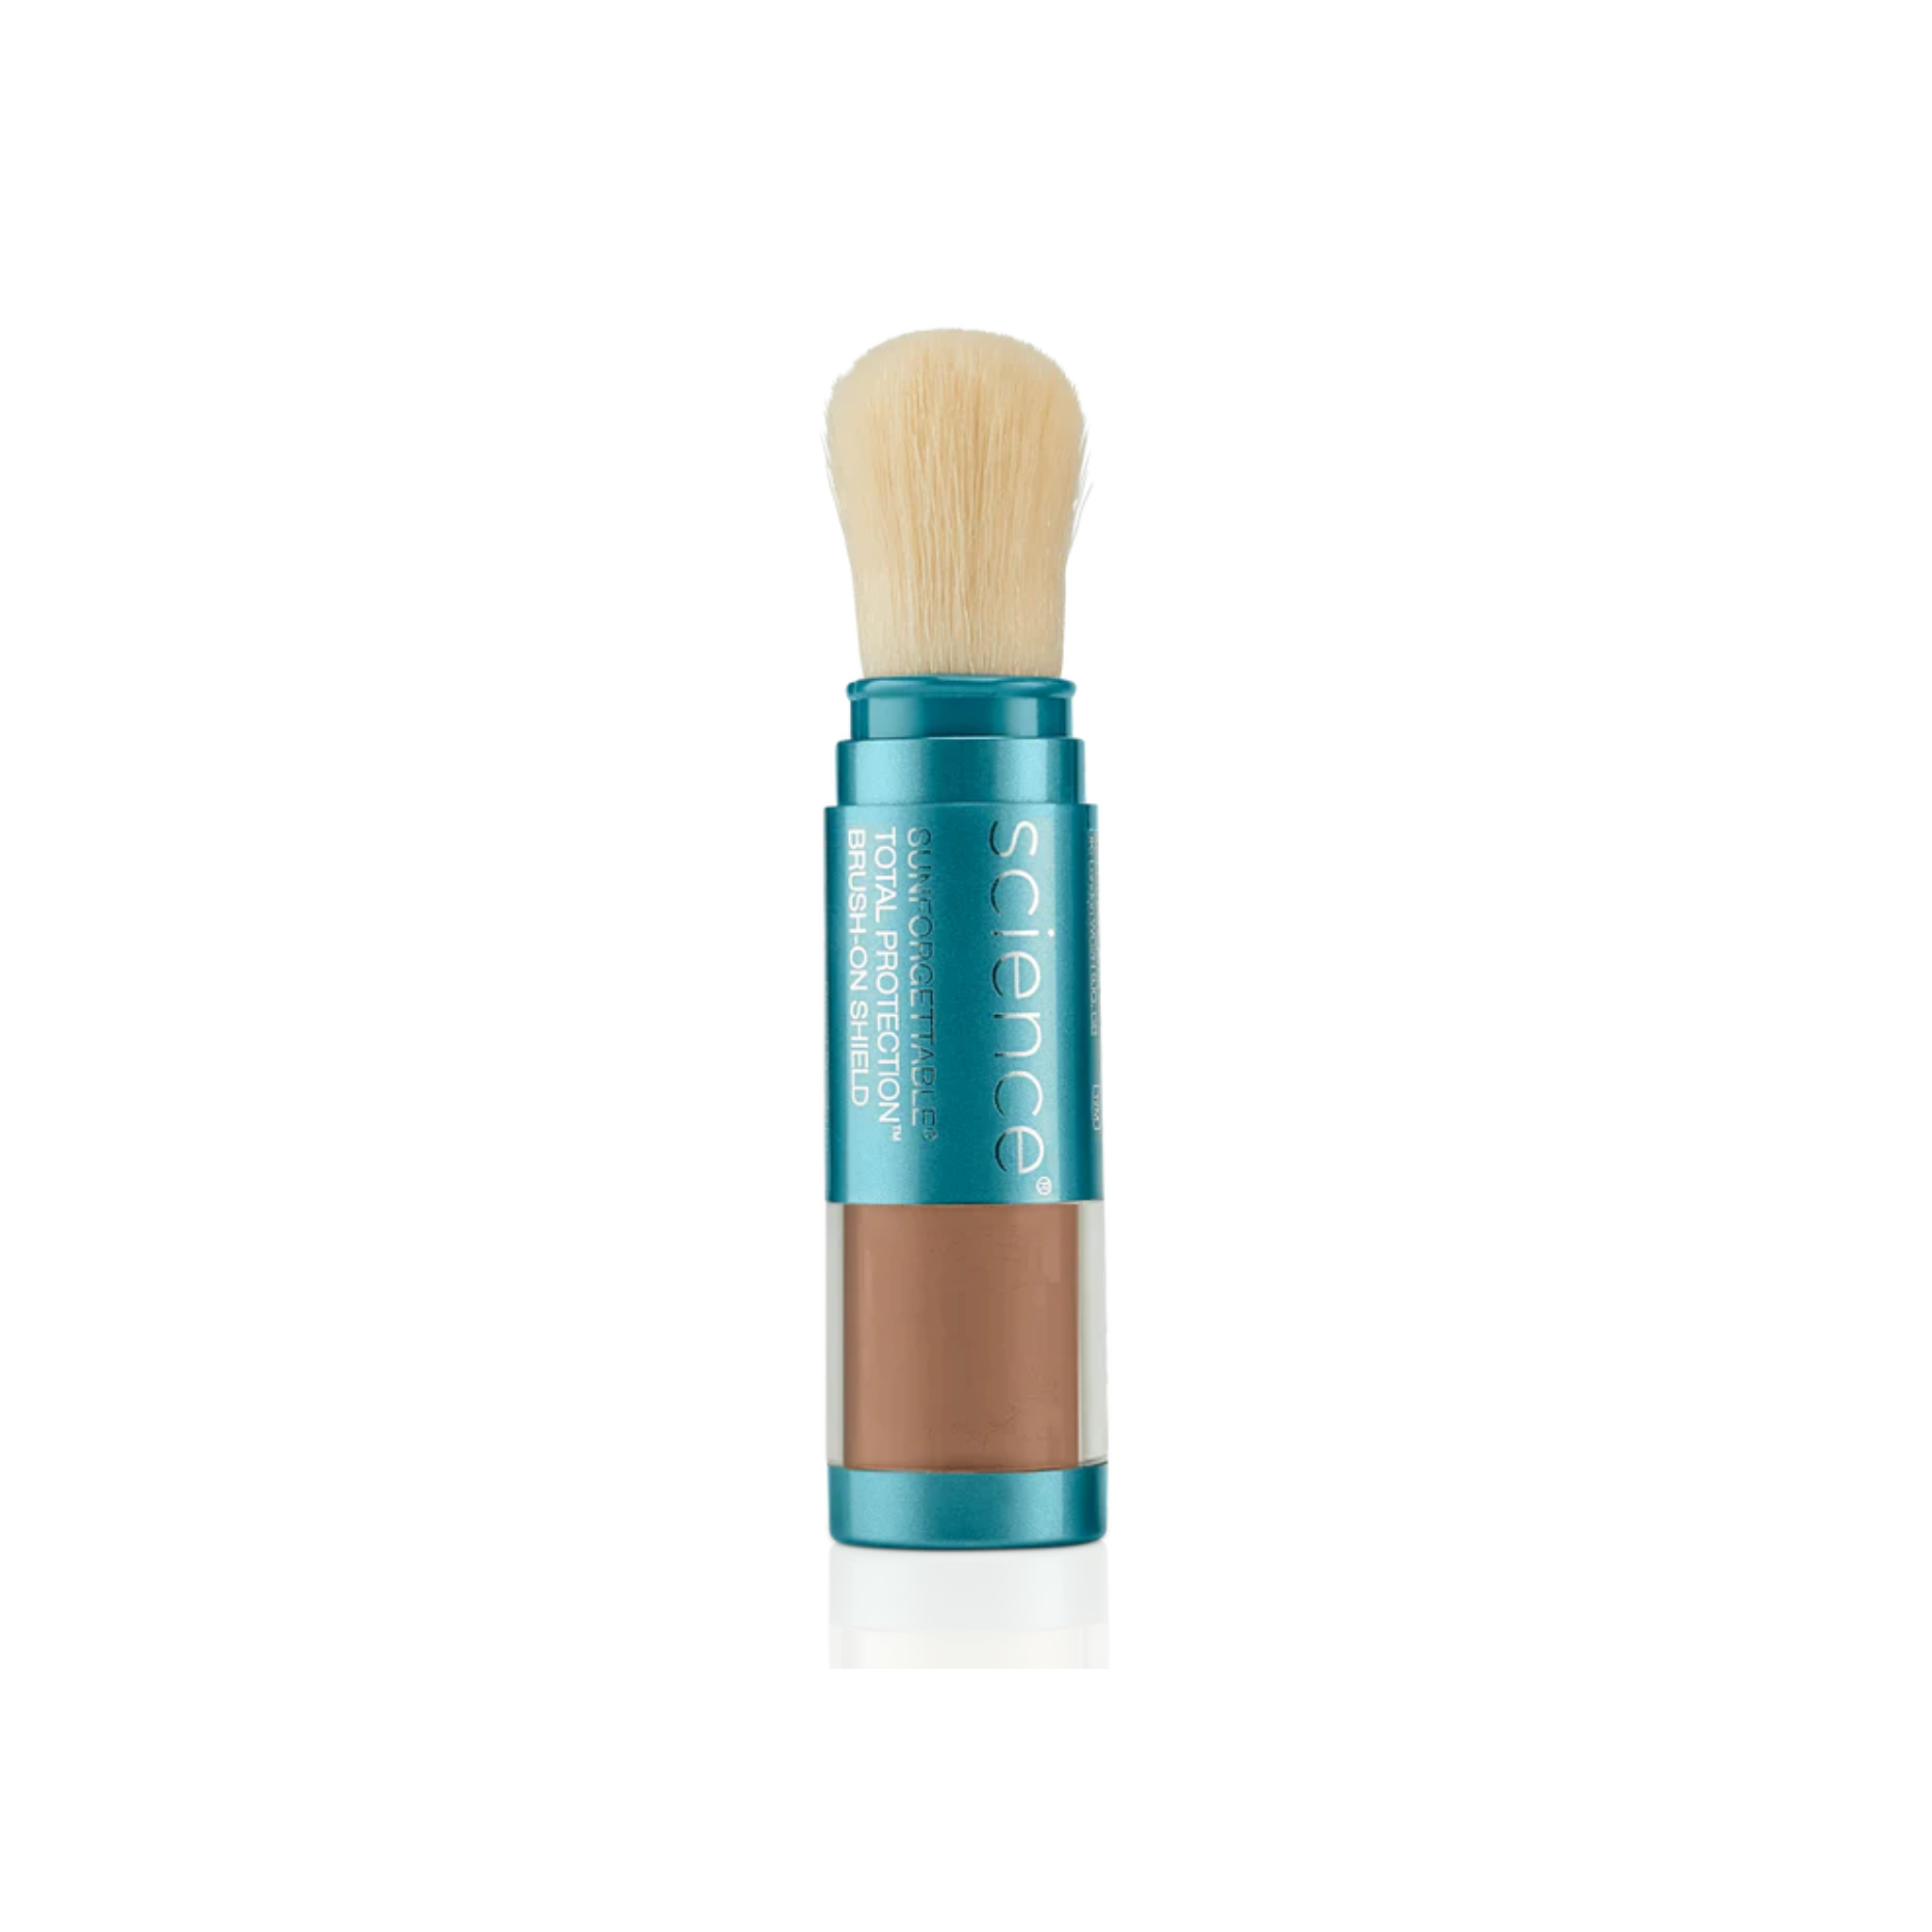 Sunforgettable Total Protection Brush On Shield SPF 50